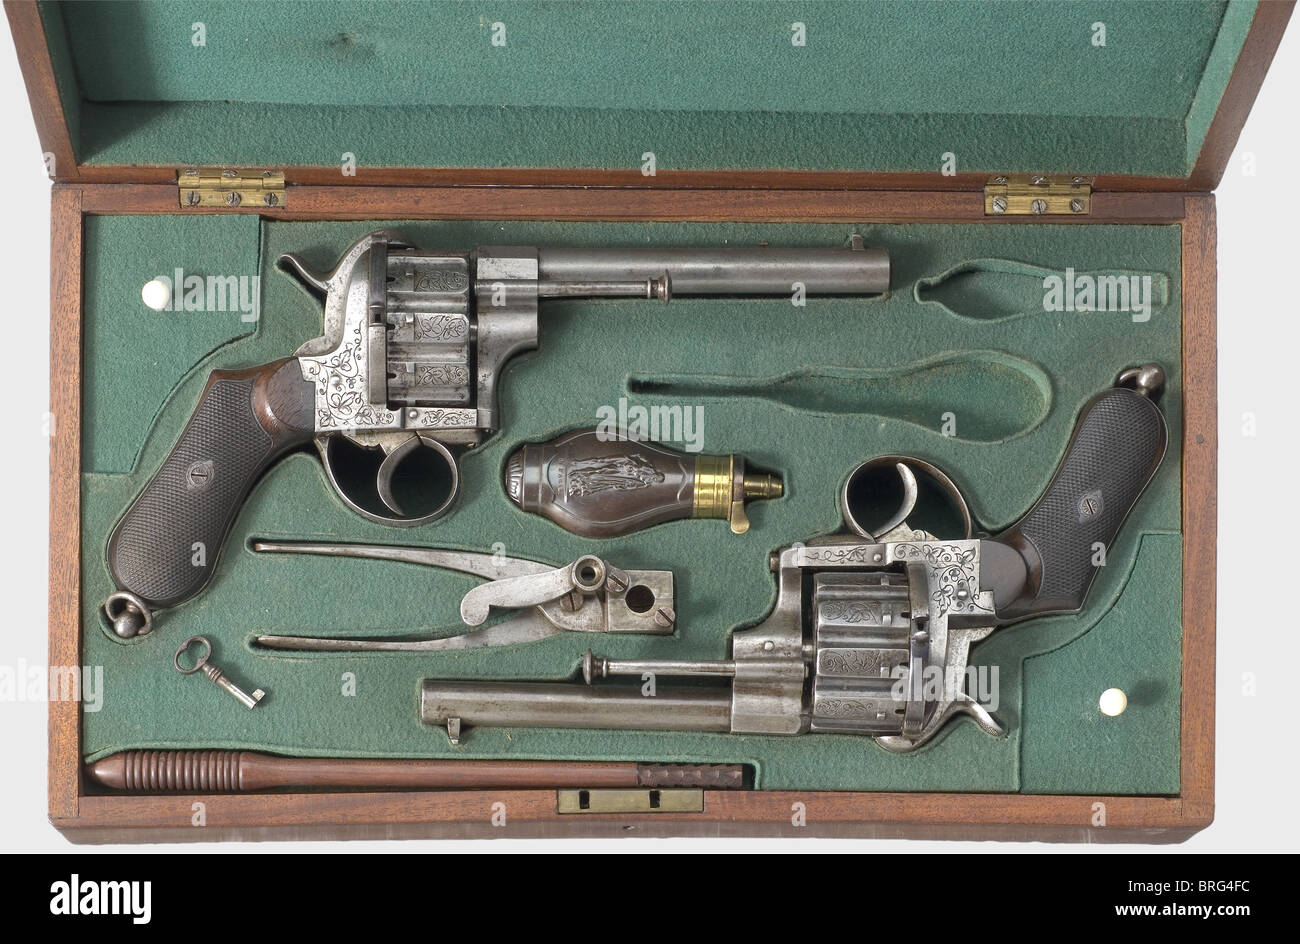 A cased pair of ten-shot pin-fire revolvers,Liège,circa 1870. 11 mm Lefaucheux calibre. Serial numbers 107790 and 110566. Slightly different revolvers with ten-shot cylinders. Frames and cylinders are engraved with grape leaf decoration. Walnut grip panels with fine checkering. Lanyard rings. Length of each 29 cm. In a later(?)case lined with green felt,also containing powder flask,bullet mould,and cleaning rod. Lockable. Key present. Case dimensions 43 x 24 x 9,5 cm. Erwerbsscheinpflichtig. historic,historical,19th century,civil handgun,civil handgun,Additional-Rights-Clearences-Not Available Stock Photo